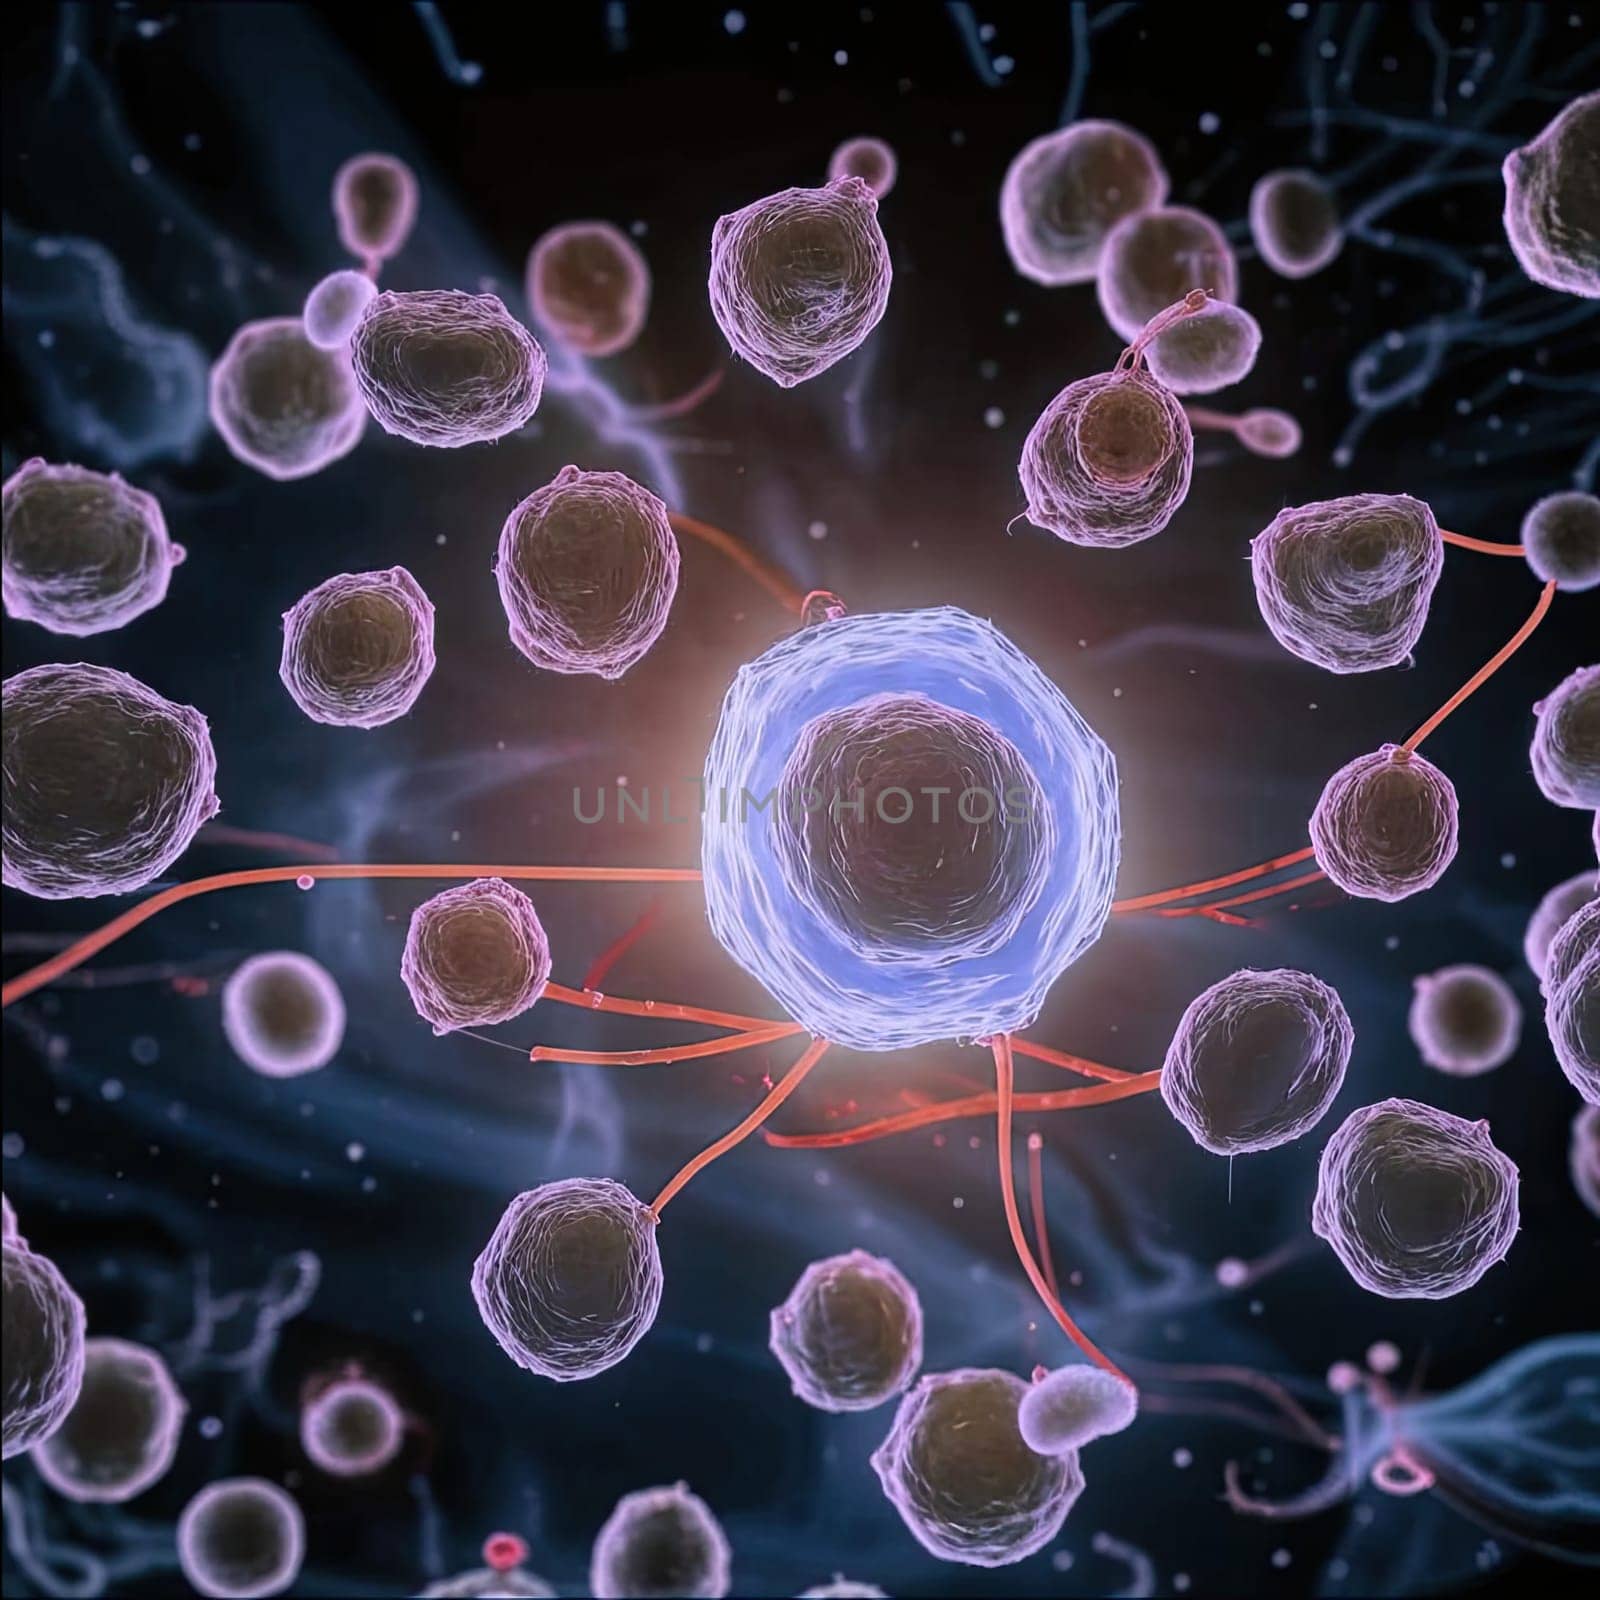 Illustration of a set of cells. Reproduction technologies. In vitro gametogenesis. This technique transforms skin cells into induced stem cells, which can then be turned into eggs and sperm.